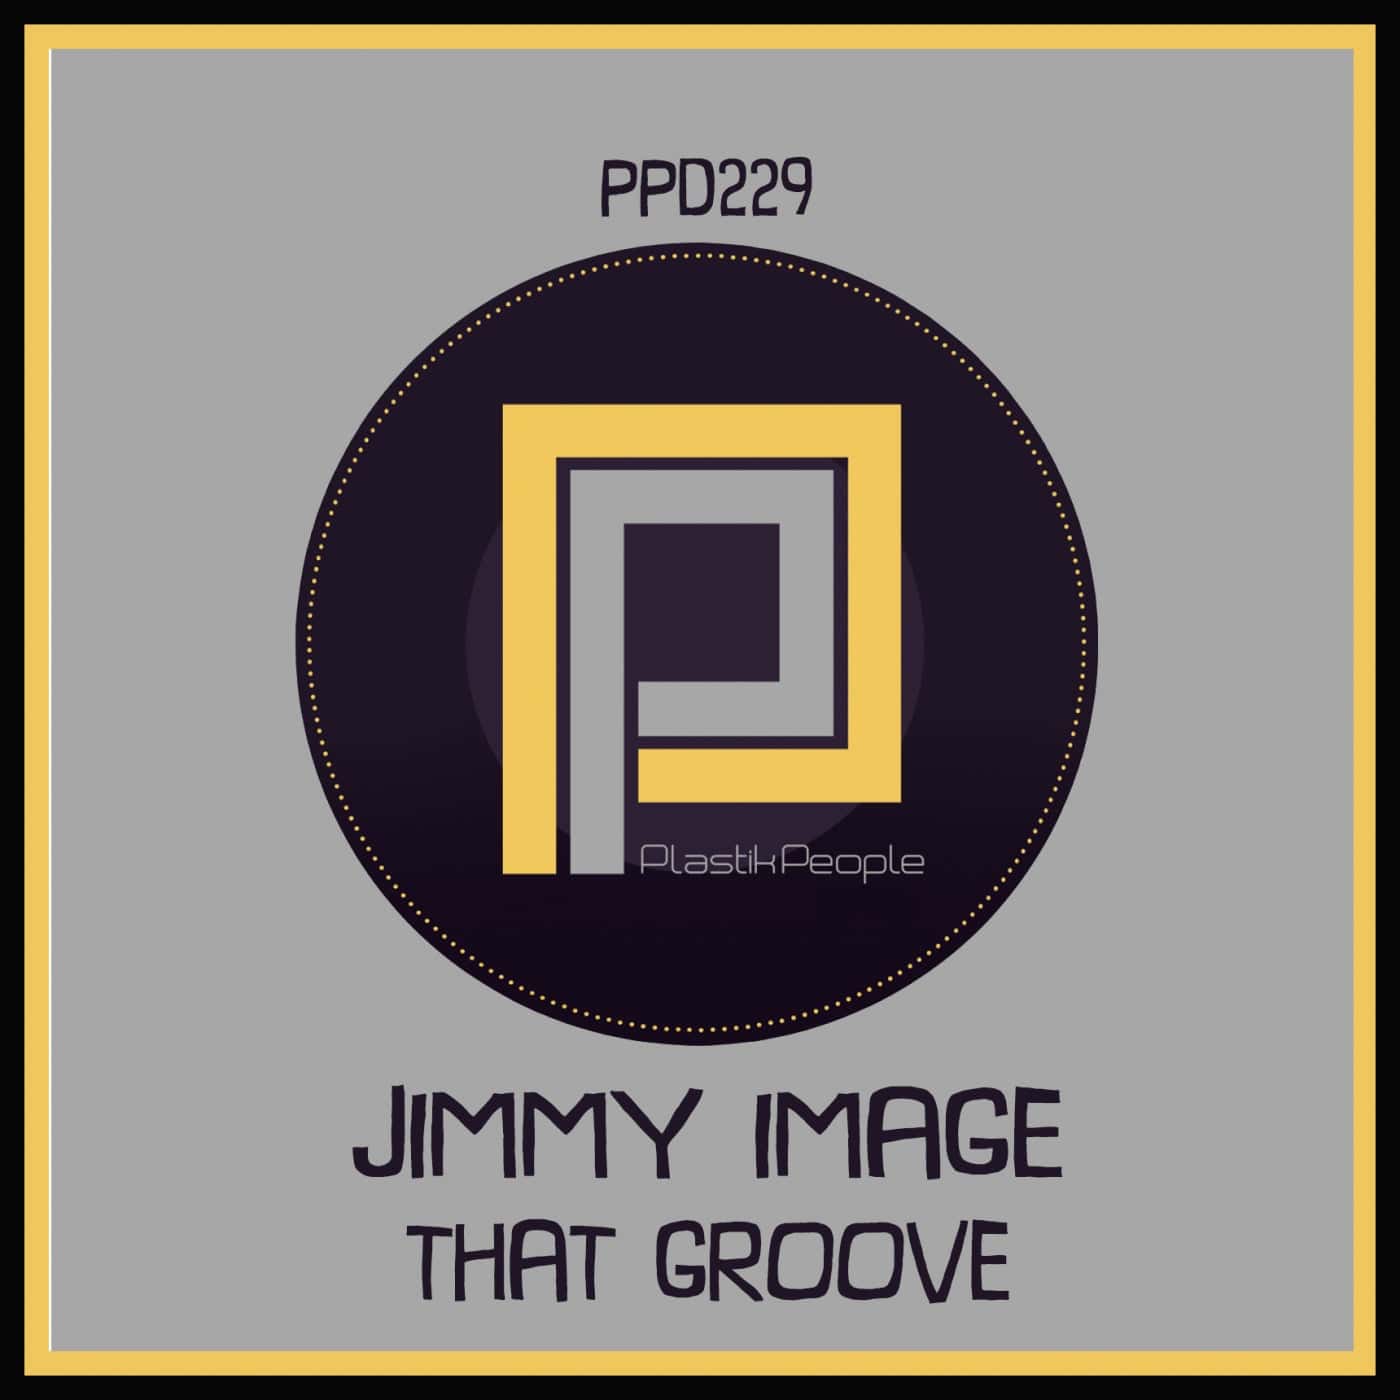 image cover: Jimmy Image - That Groove / PPD229